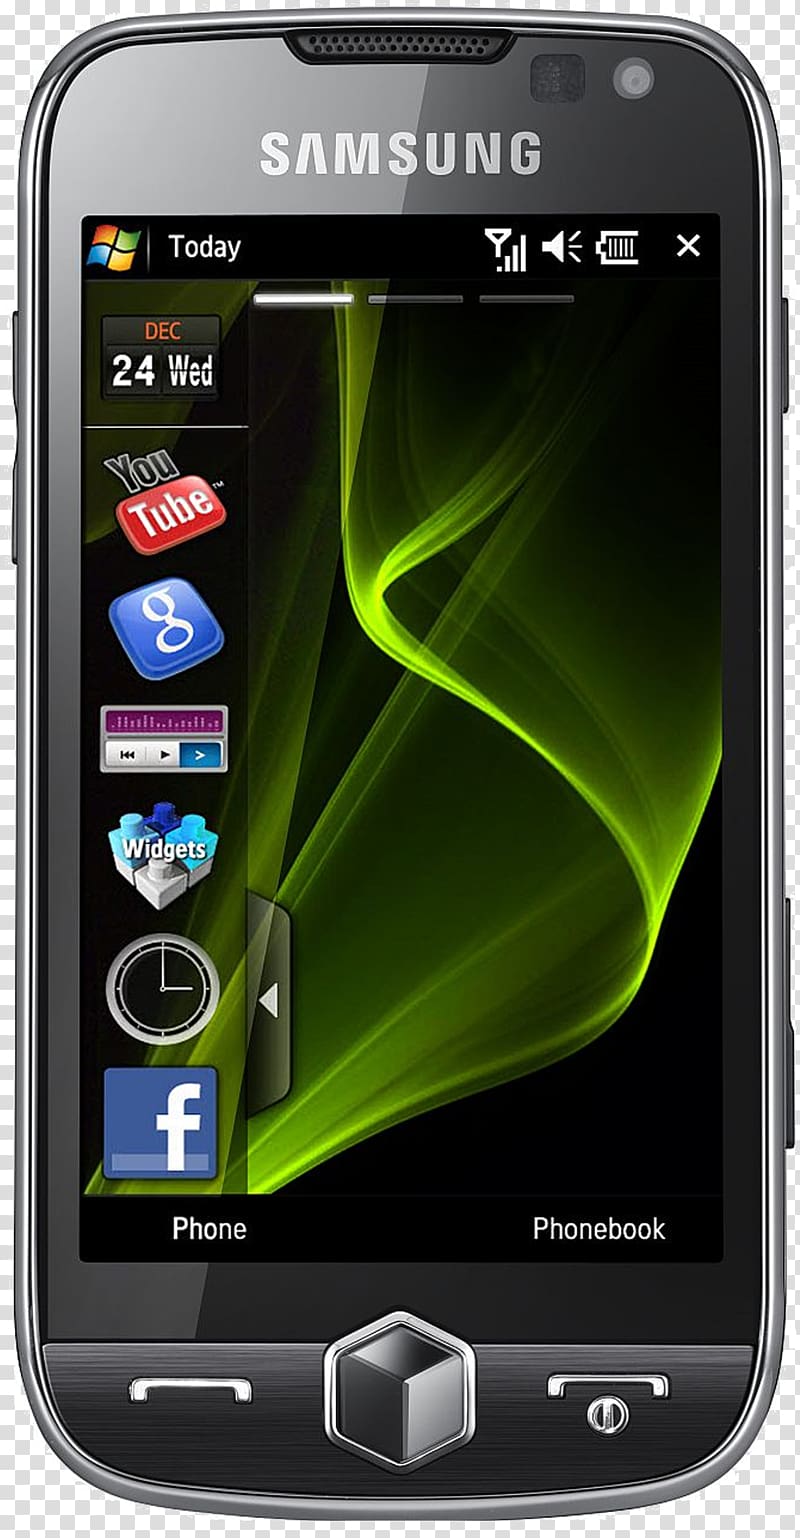 Samsung i8000 Samsung SGH-i900 Samsung Galaxy Samsung Omnia Series Telephone, intelligent mobile phone transparent background PNG clipart